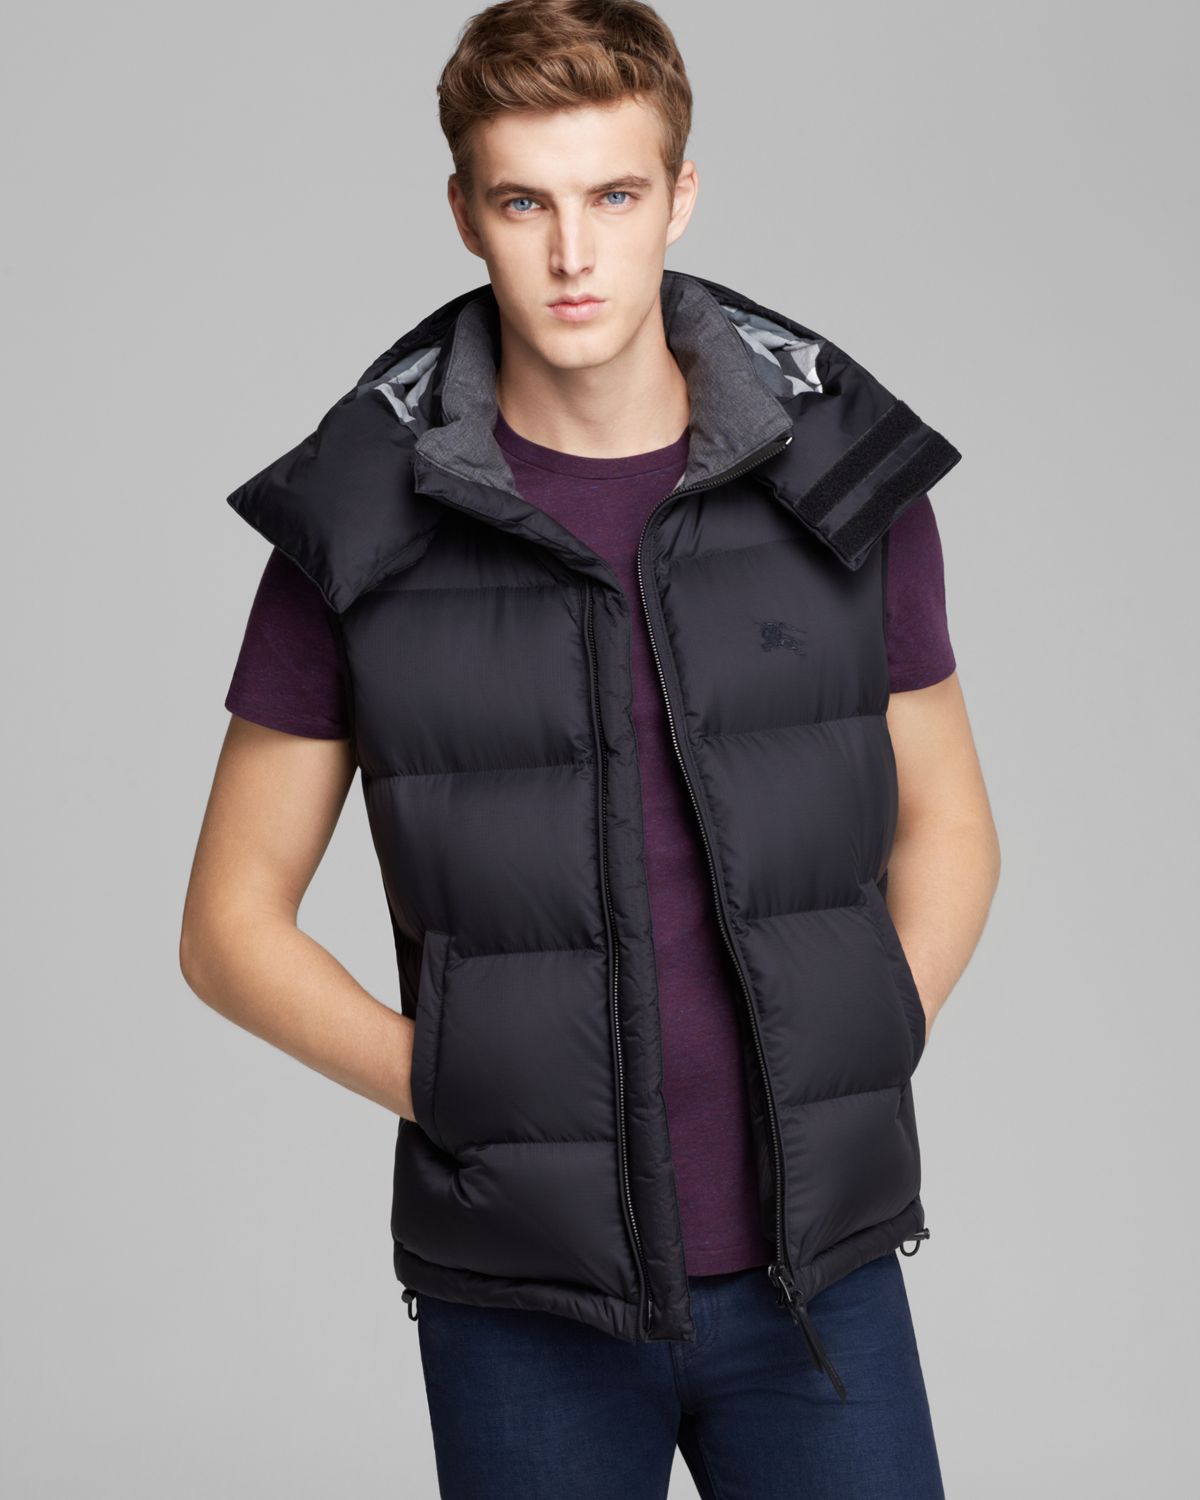 Burberry Brit Crosby Puffer Vest in Military Red (Black) for Men - Lyst